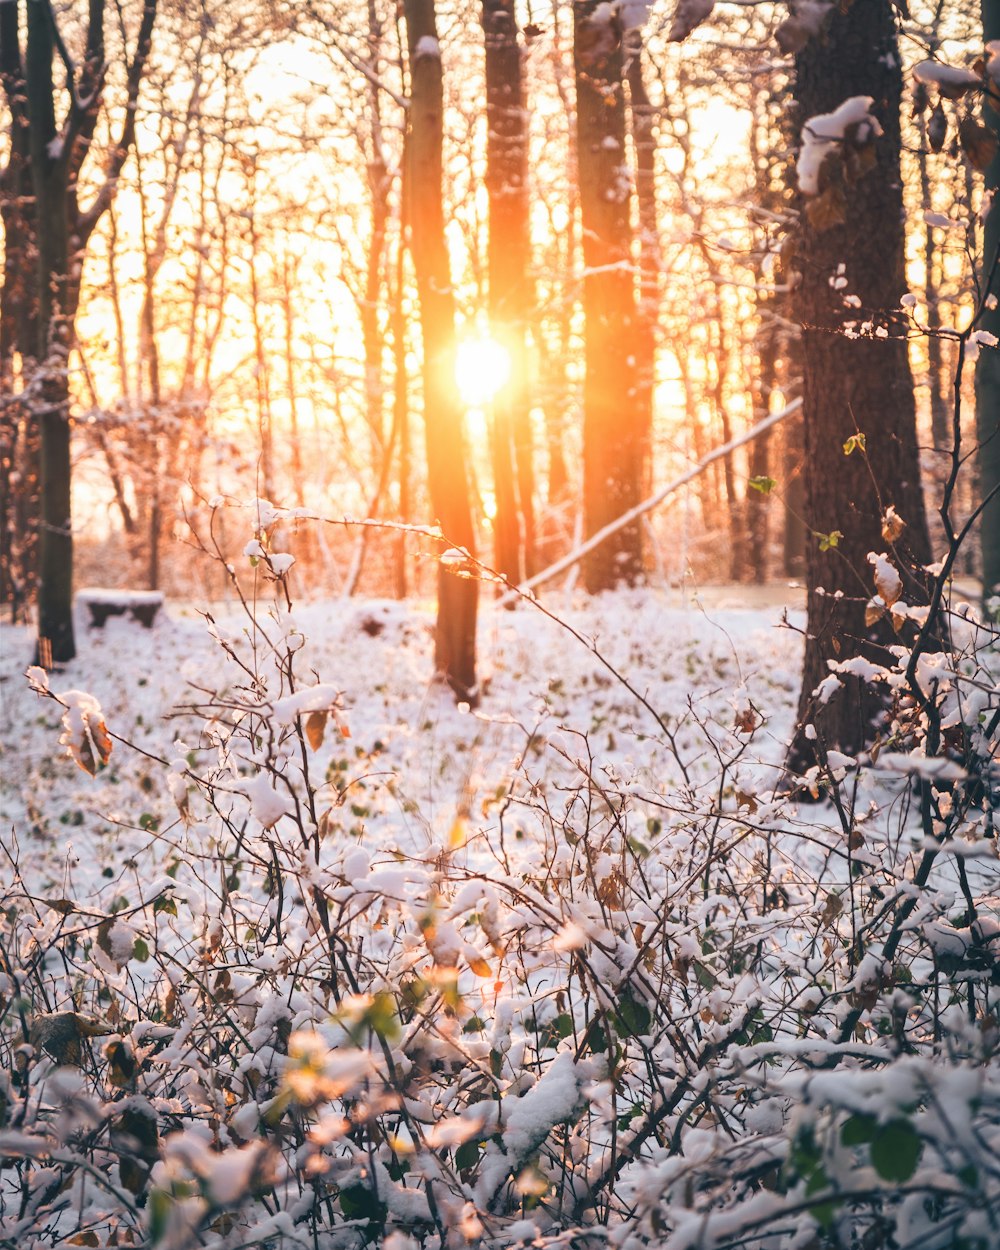 the sun shines through the trees in a snowy forest